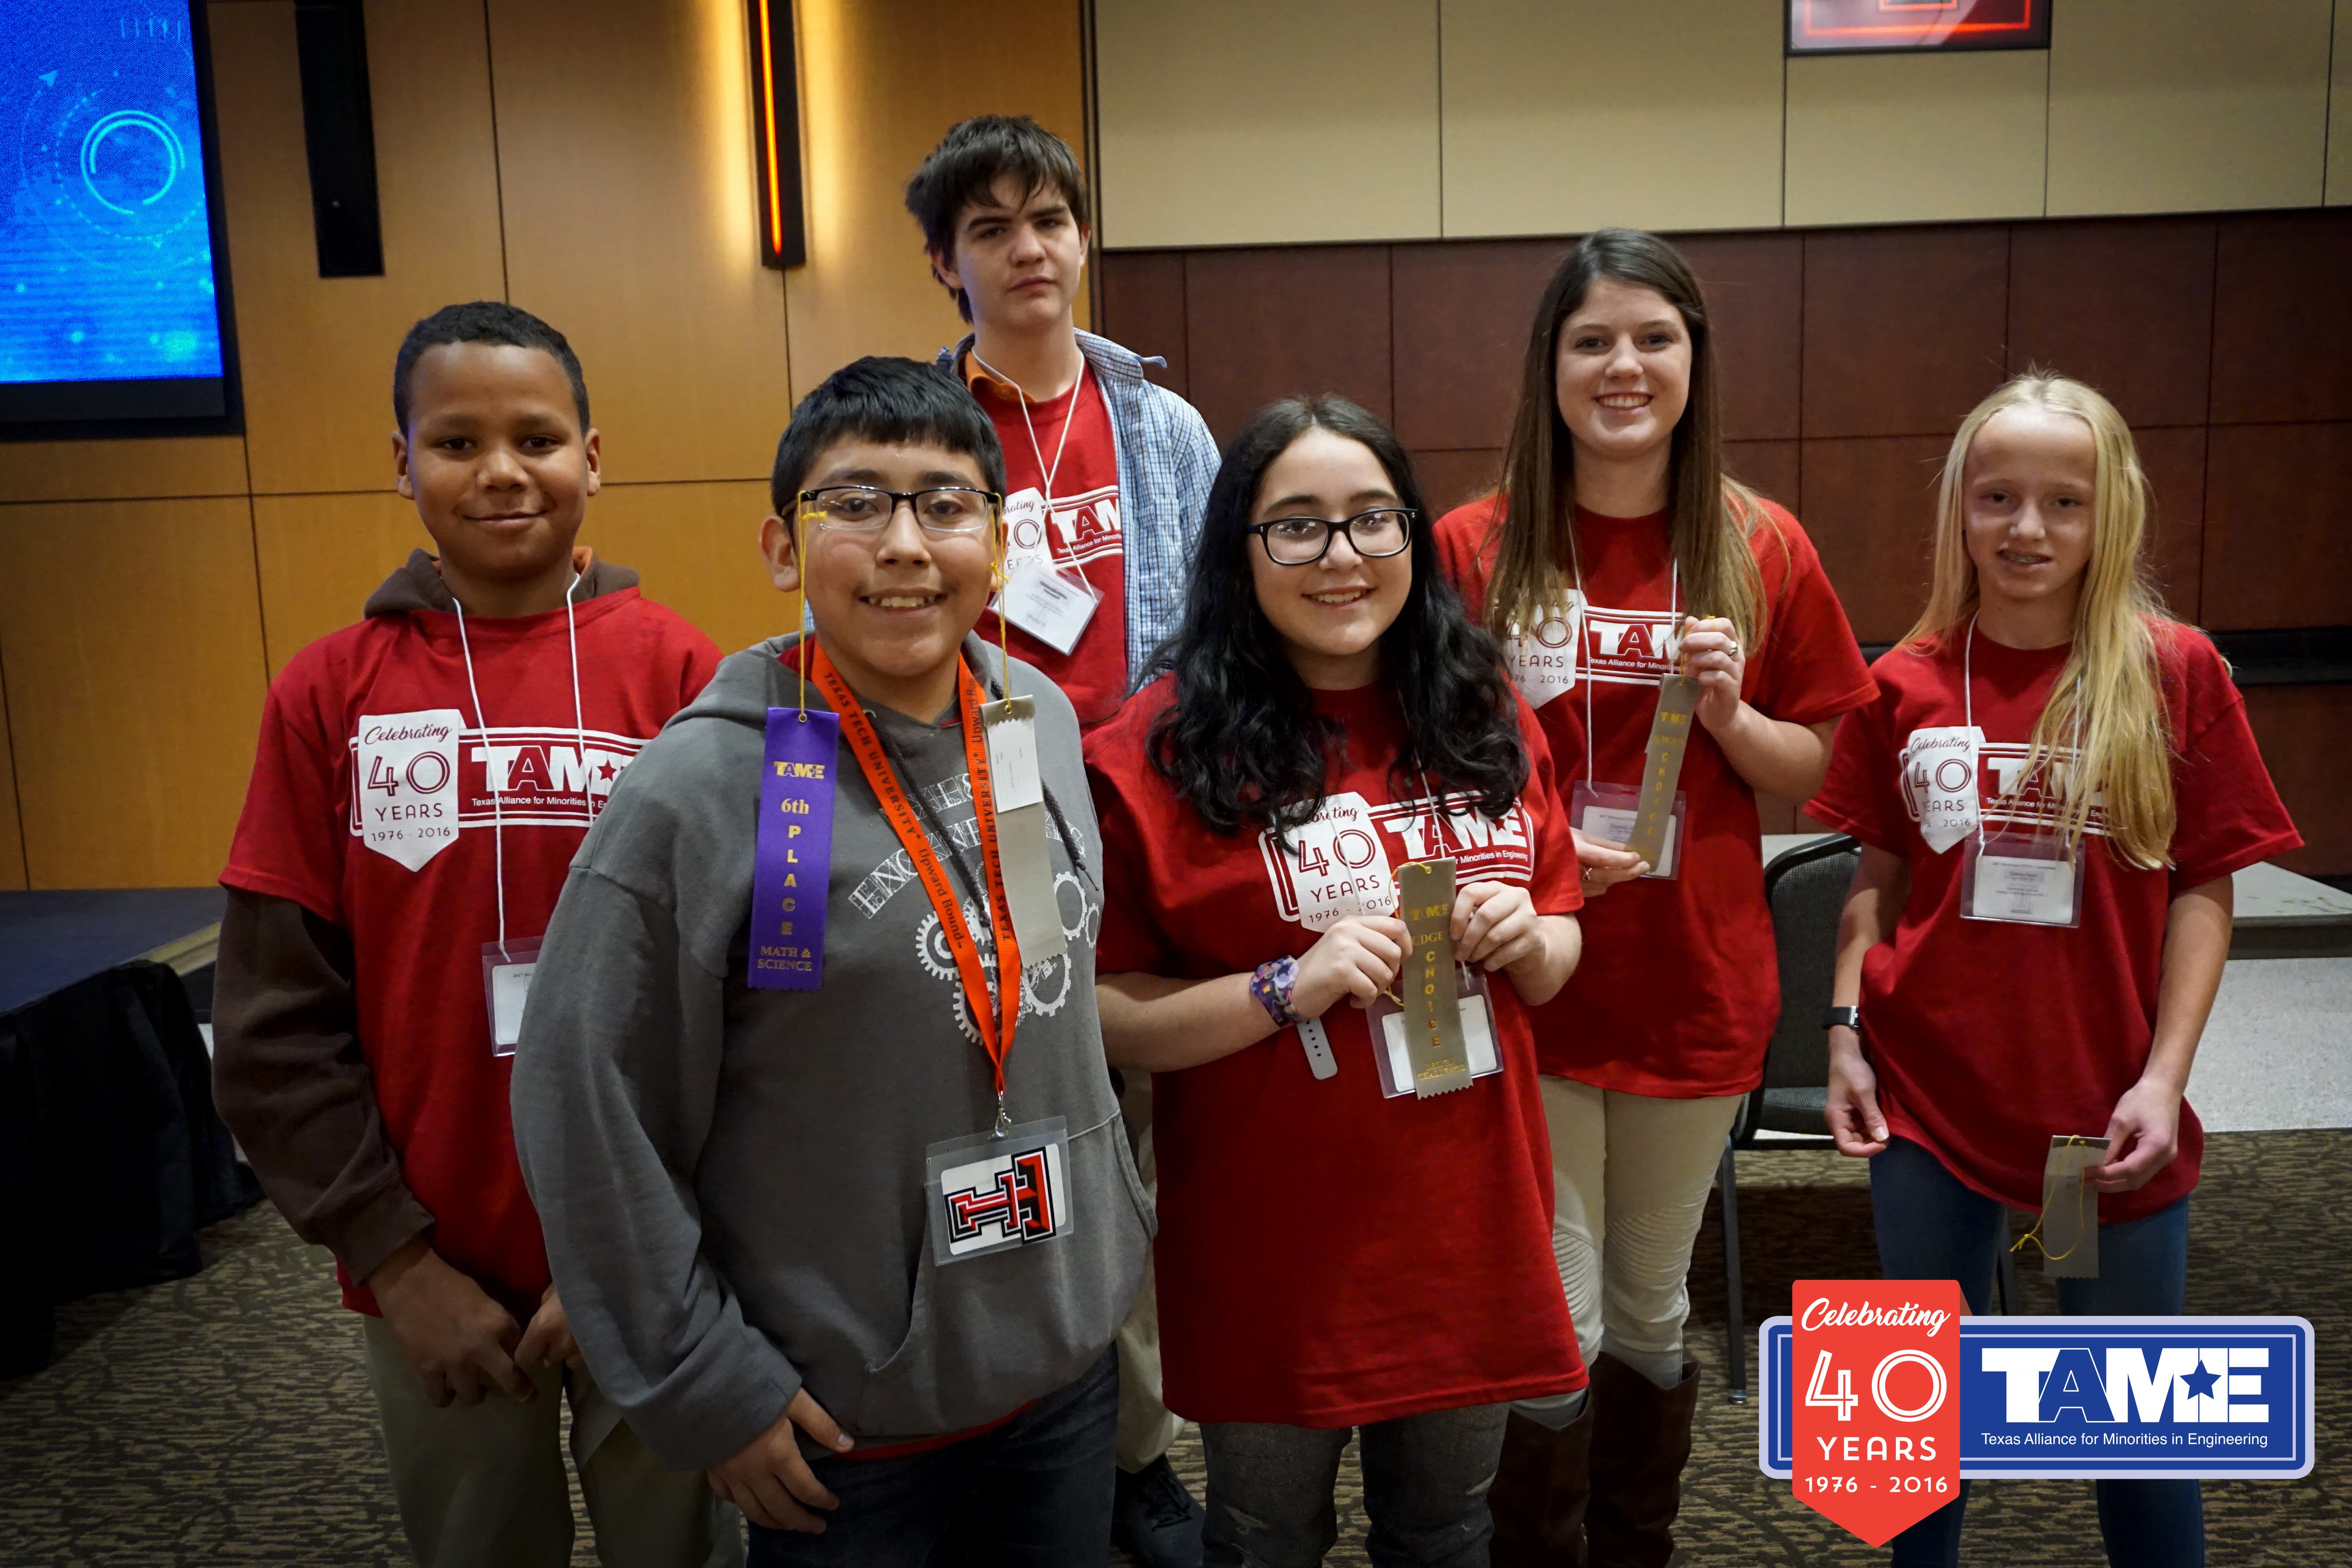 (Lubbock, TX) – The 2017 TAME Lubbock STEM Competition was hosted by Texas Tech University on Saturday January 28, 2017. The event, held free of cost to participants, brought together over 70 student competitors (grades 6-12) from across the region. 